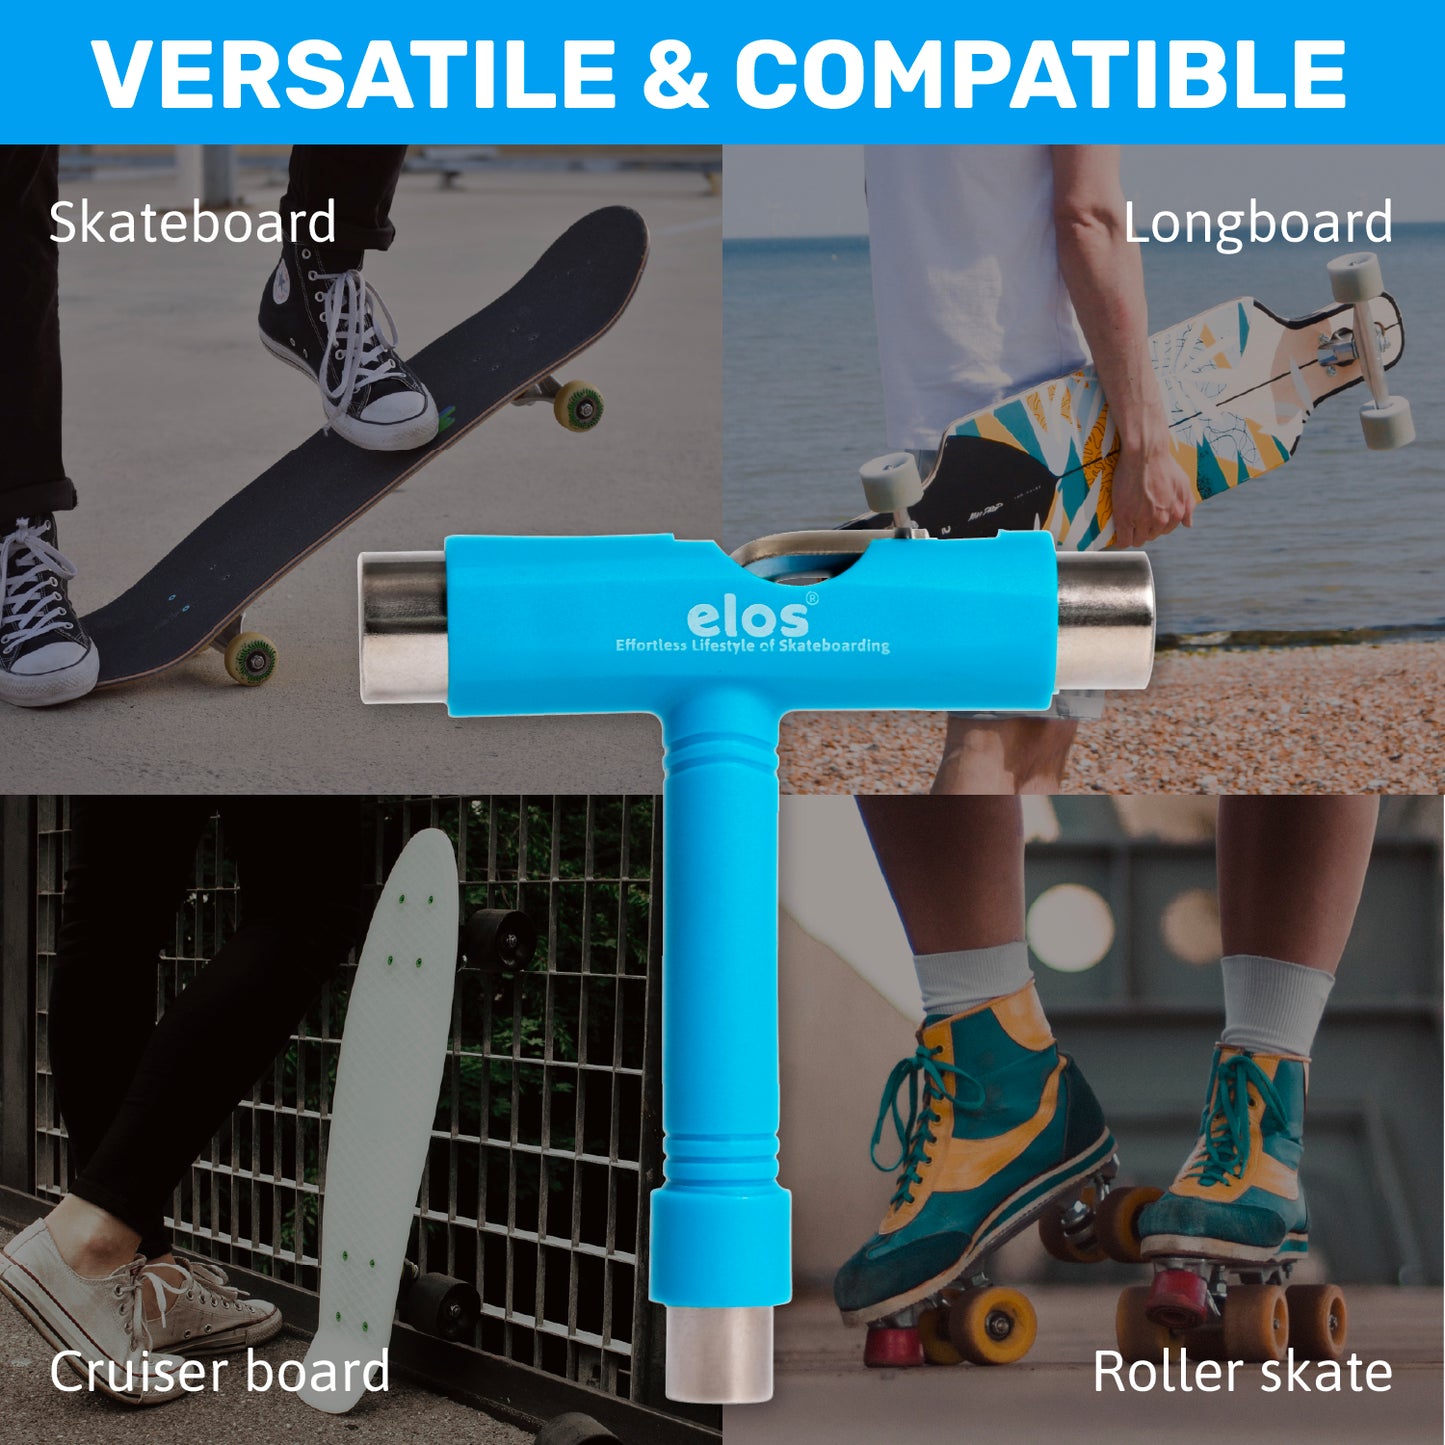 All in One Skate Tool